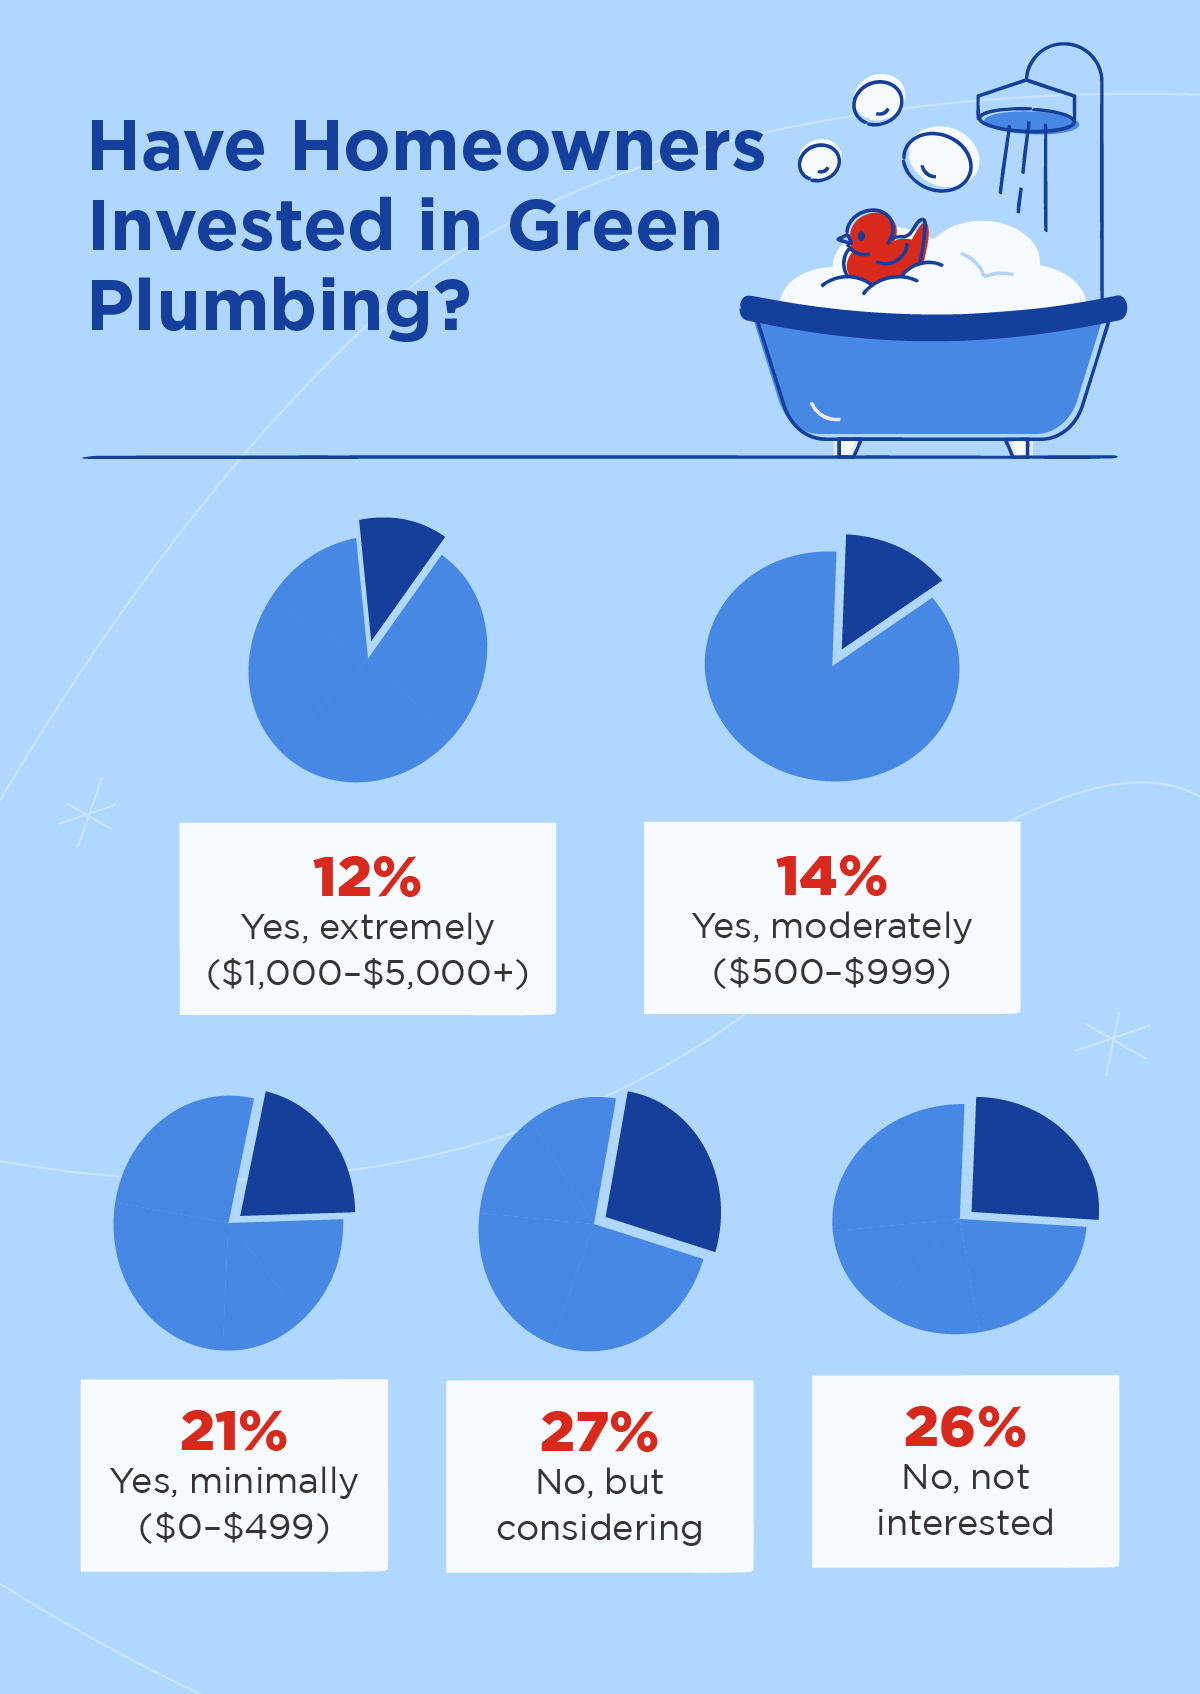 Data visualization of what percentage of homeowners have invested in green plumbing and the dollar amount they’ve invested.